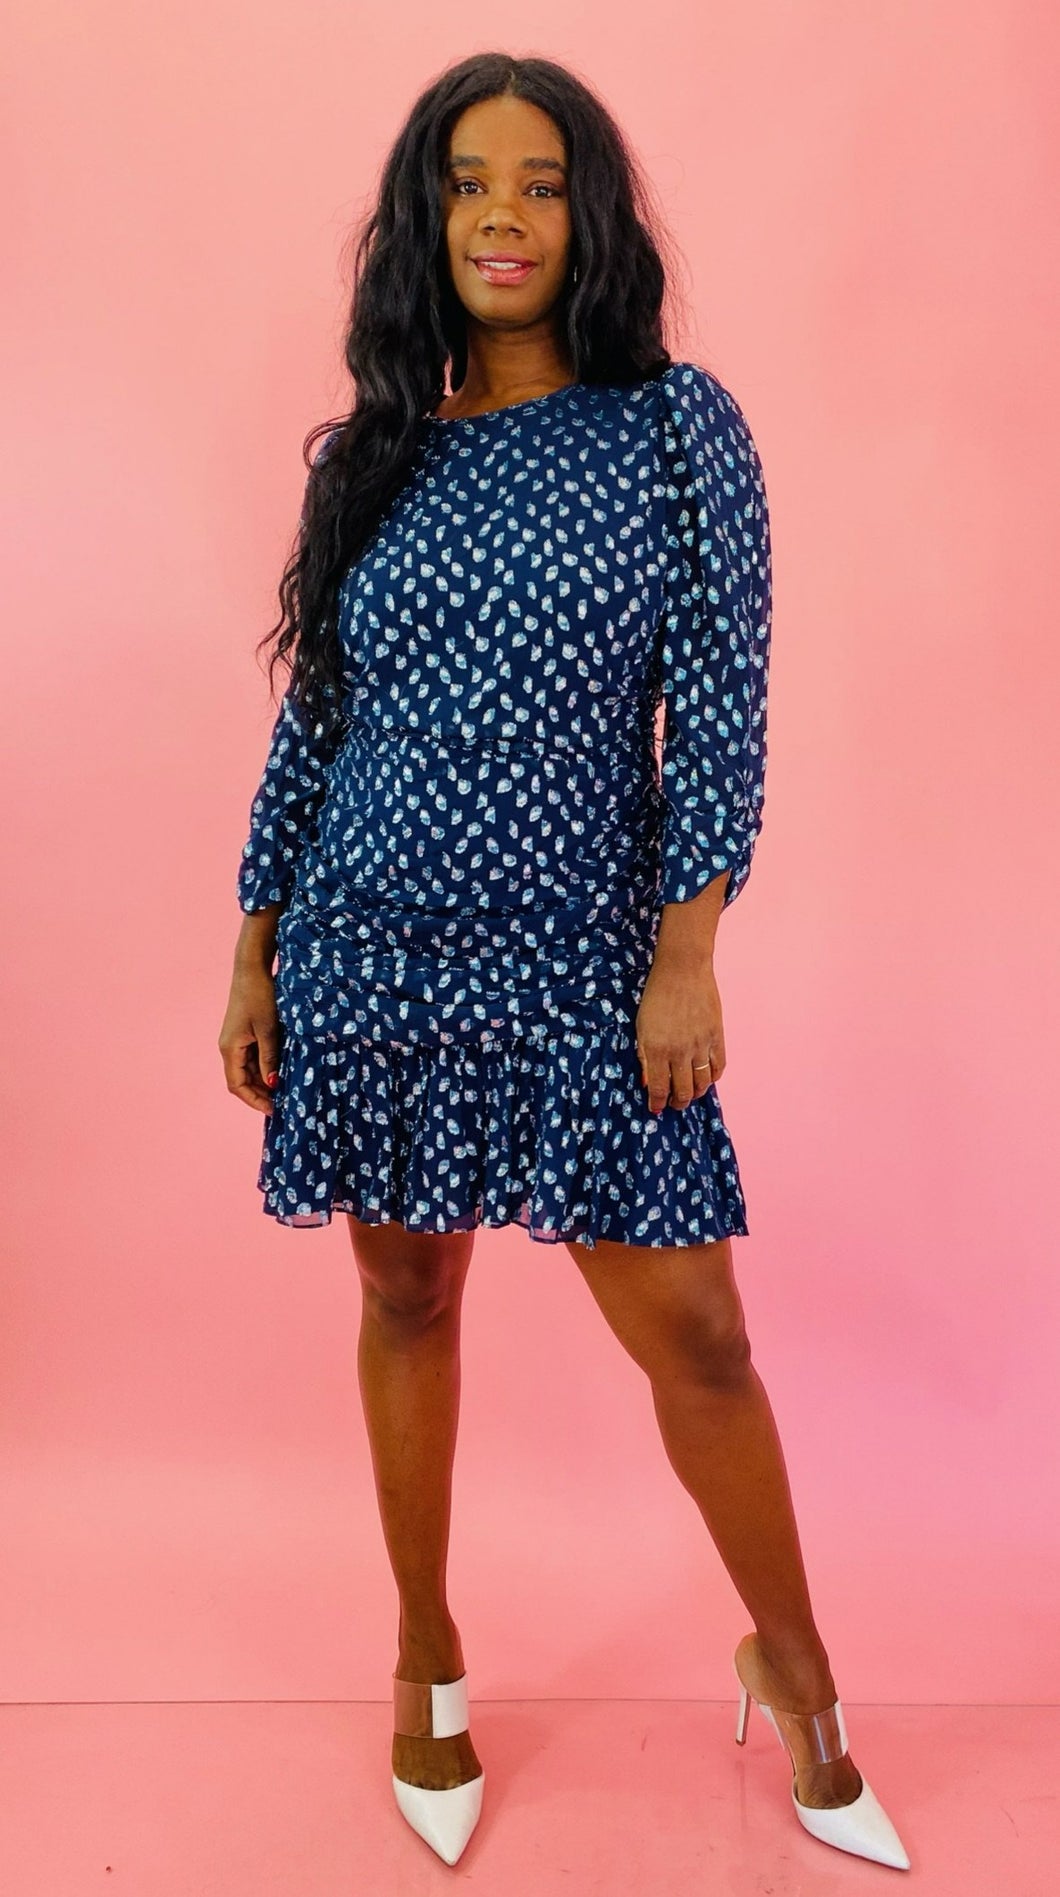 Full-body front view of a size 14 Tanya Taylor for 11HONORÉ navy blue long sleeve mini dress with light blue, and metallic silver swiss dot sheer overlay, ruffles and gathering, and a high neck styled with white heels on a size 10/12 model.